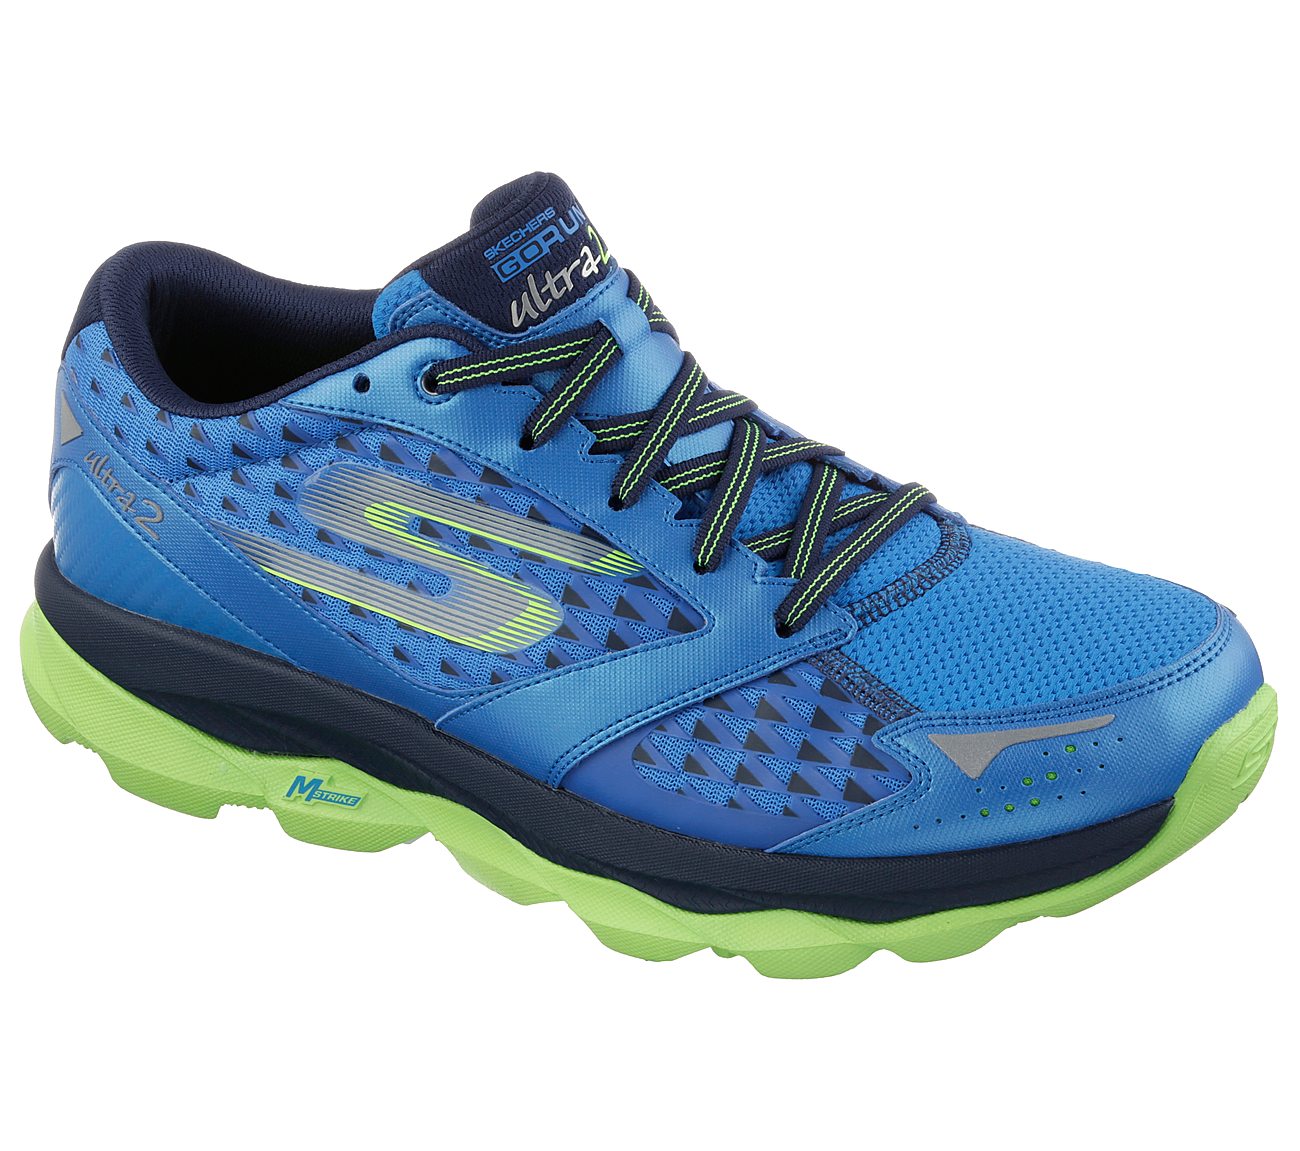 skechers go ultra 2 review